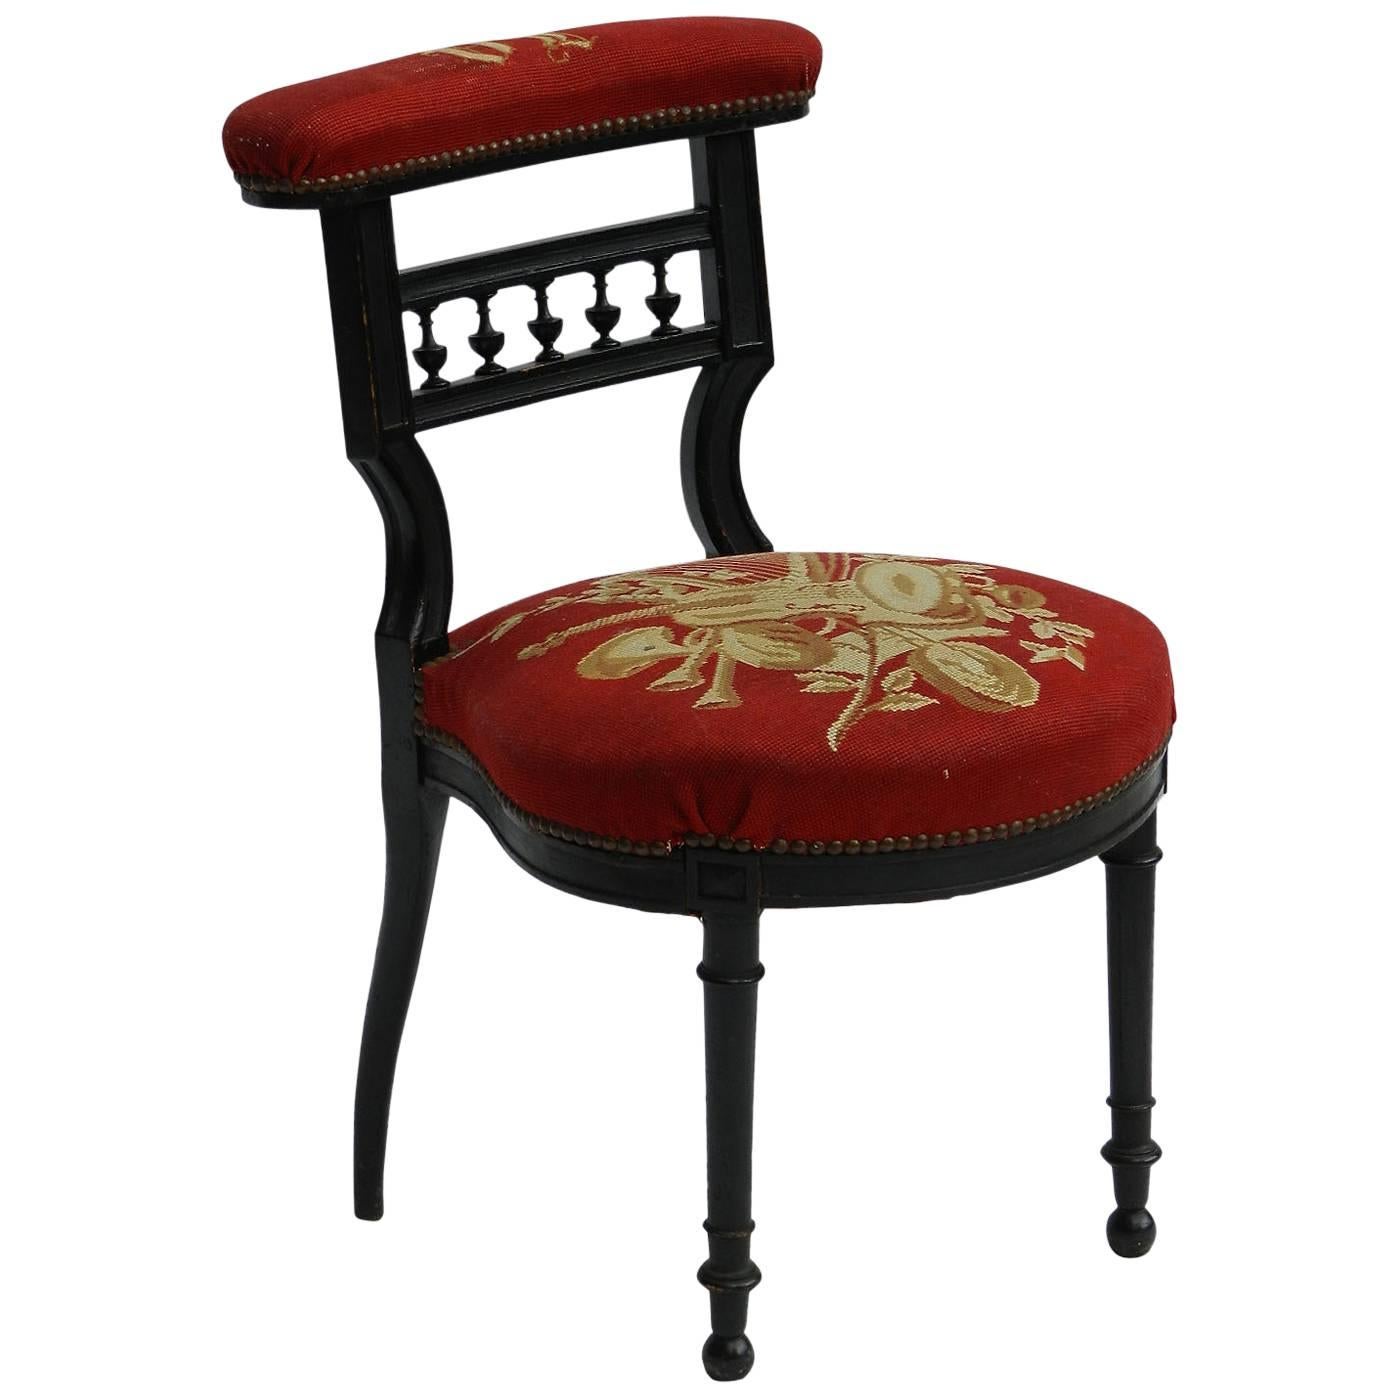 French Napoleon III musicians chair all original
19th century music side bedroom accent chair
Ebonized wood
Original petit point needlepoint needlework tapestry.
Seat height 43 cm.
Very good original antique condition with only minor signs of